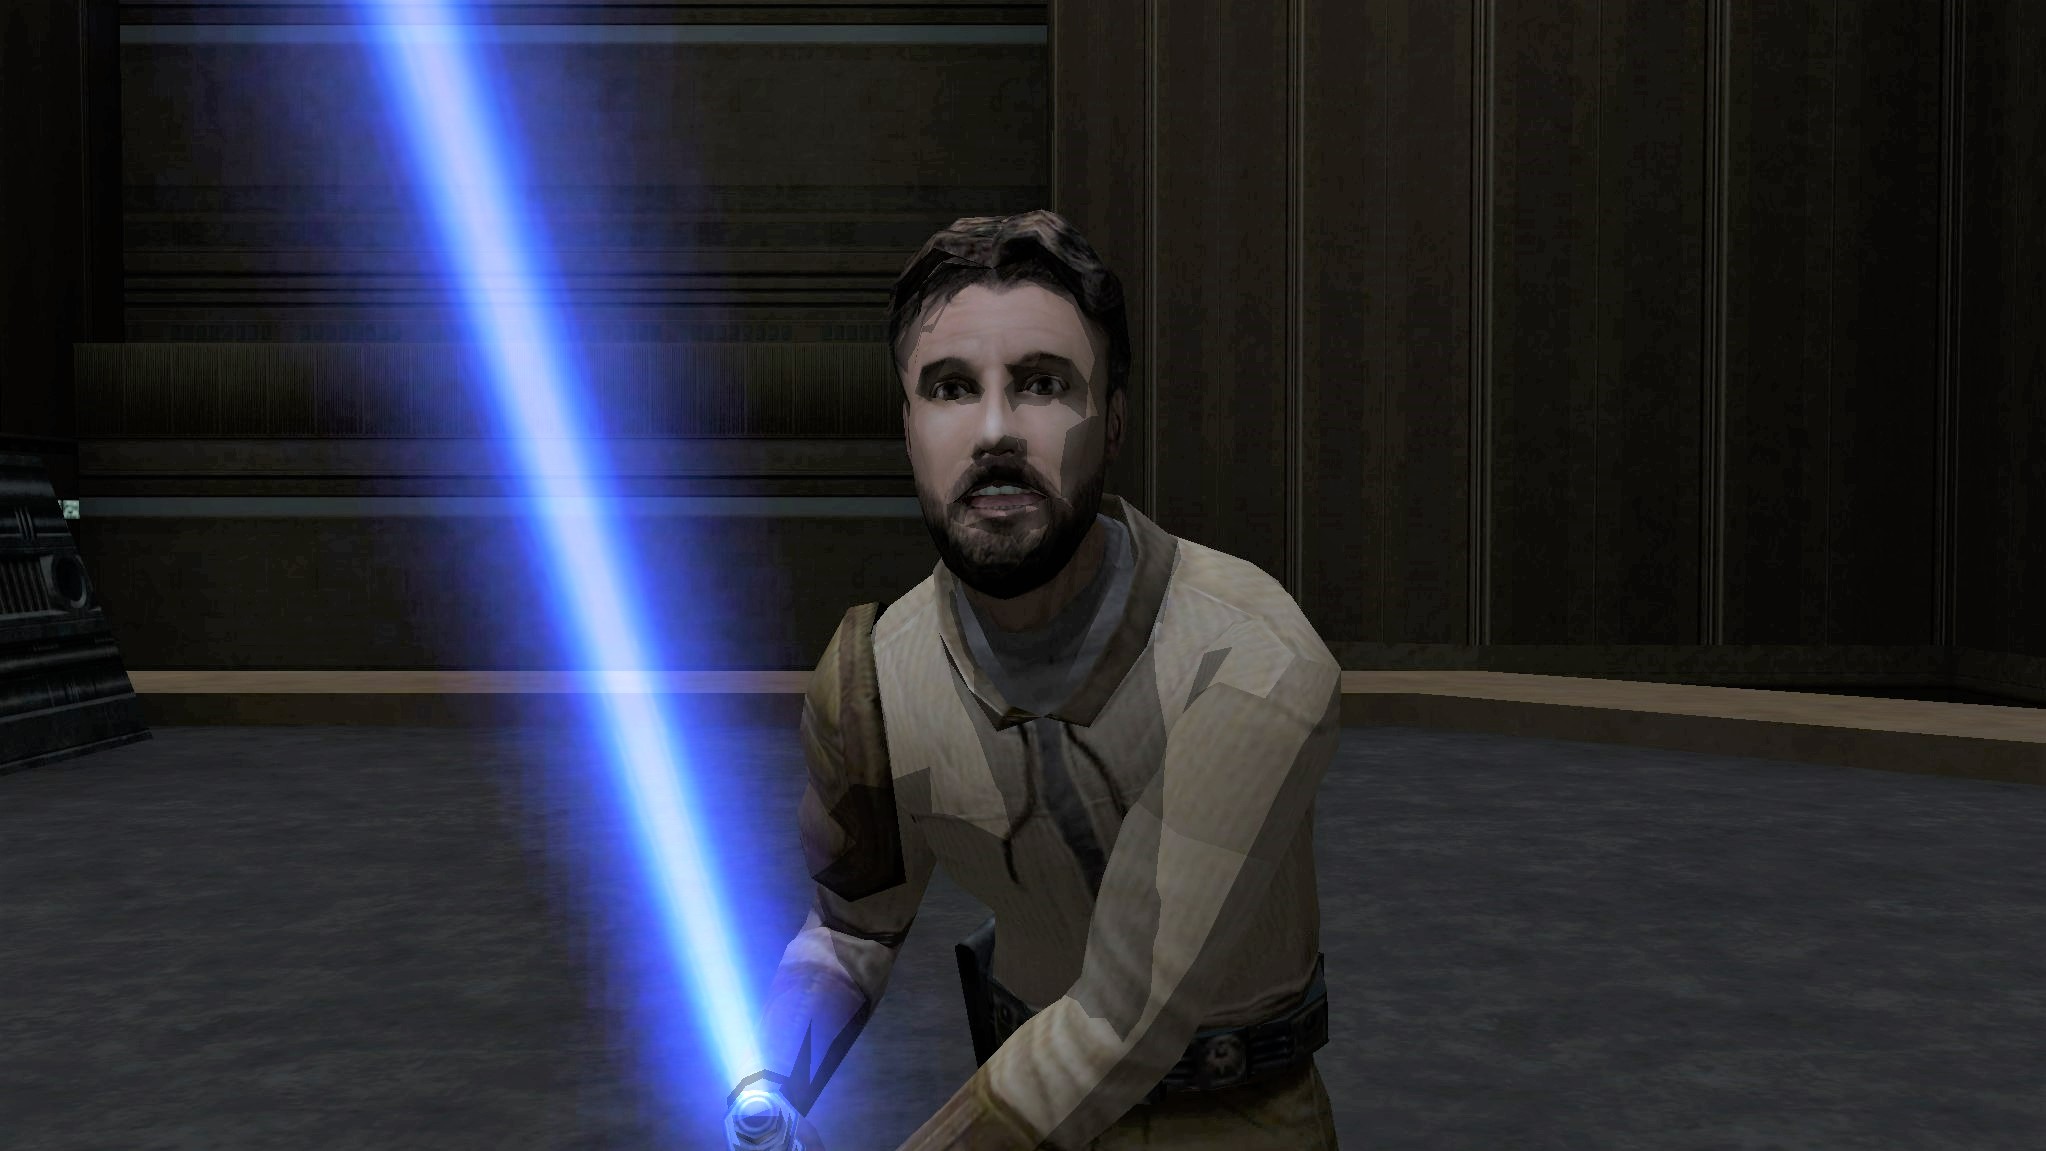  20 years on, Jedi Knight 2 still has the most exciting lightsaber duels in videogames 